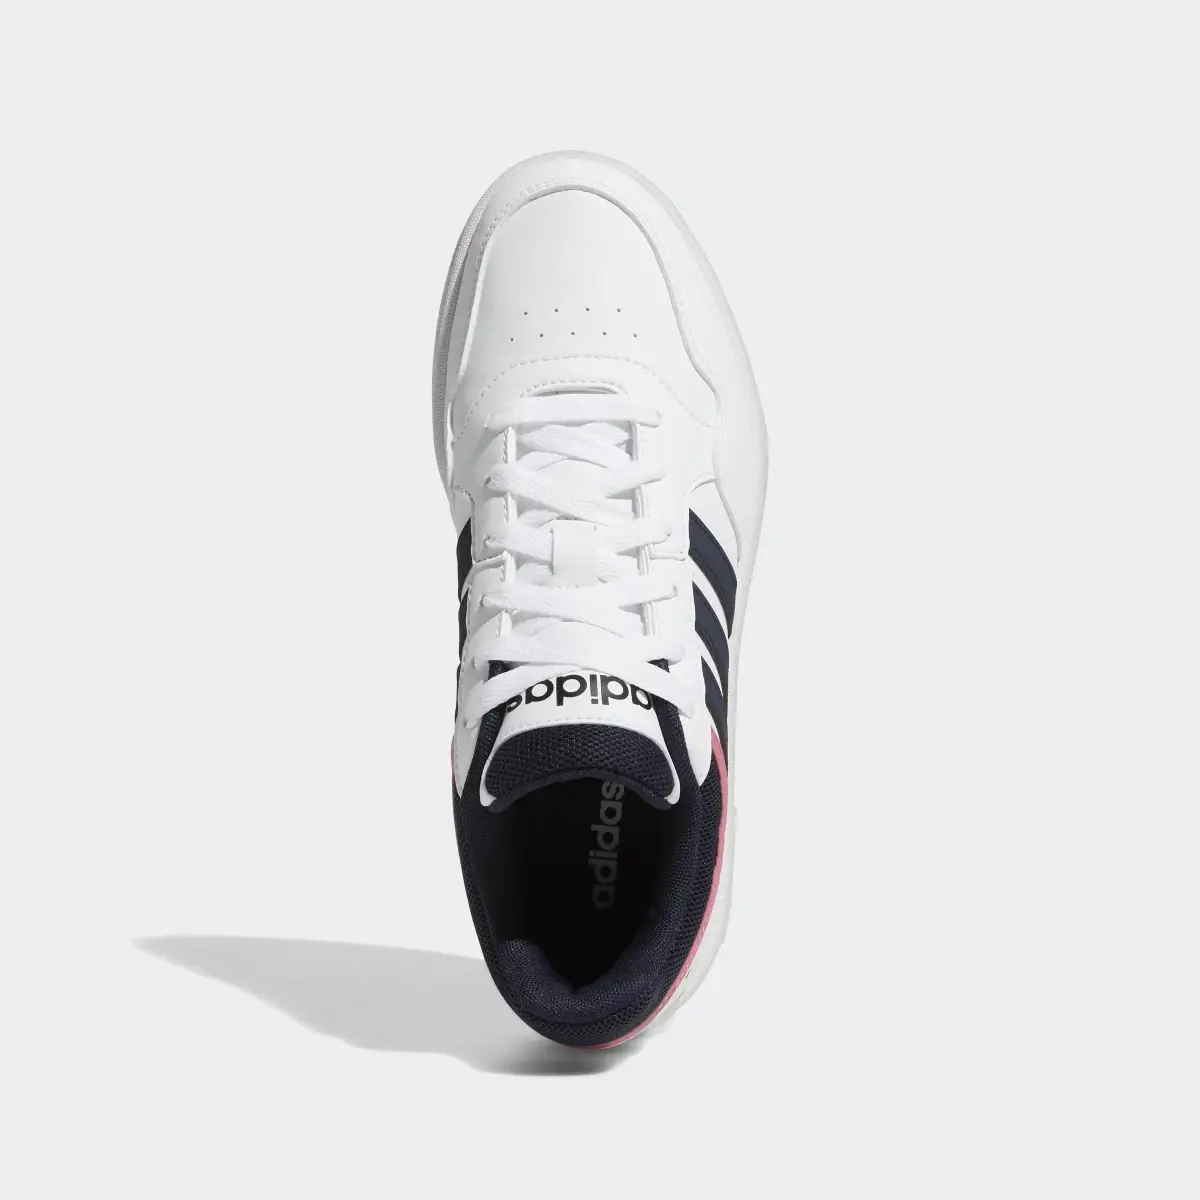 Adidas Hoops 3.0 Low Classic Shoes. 3